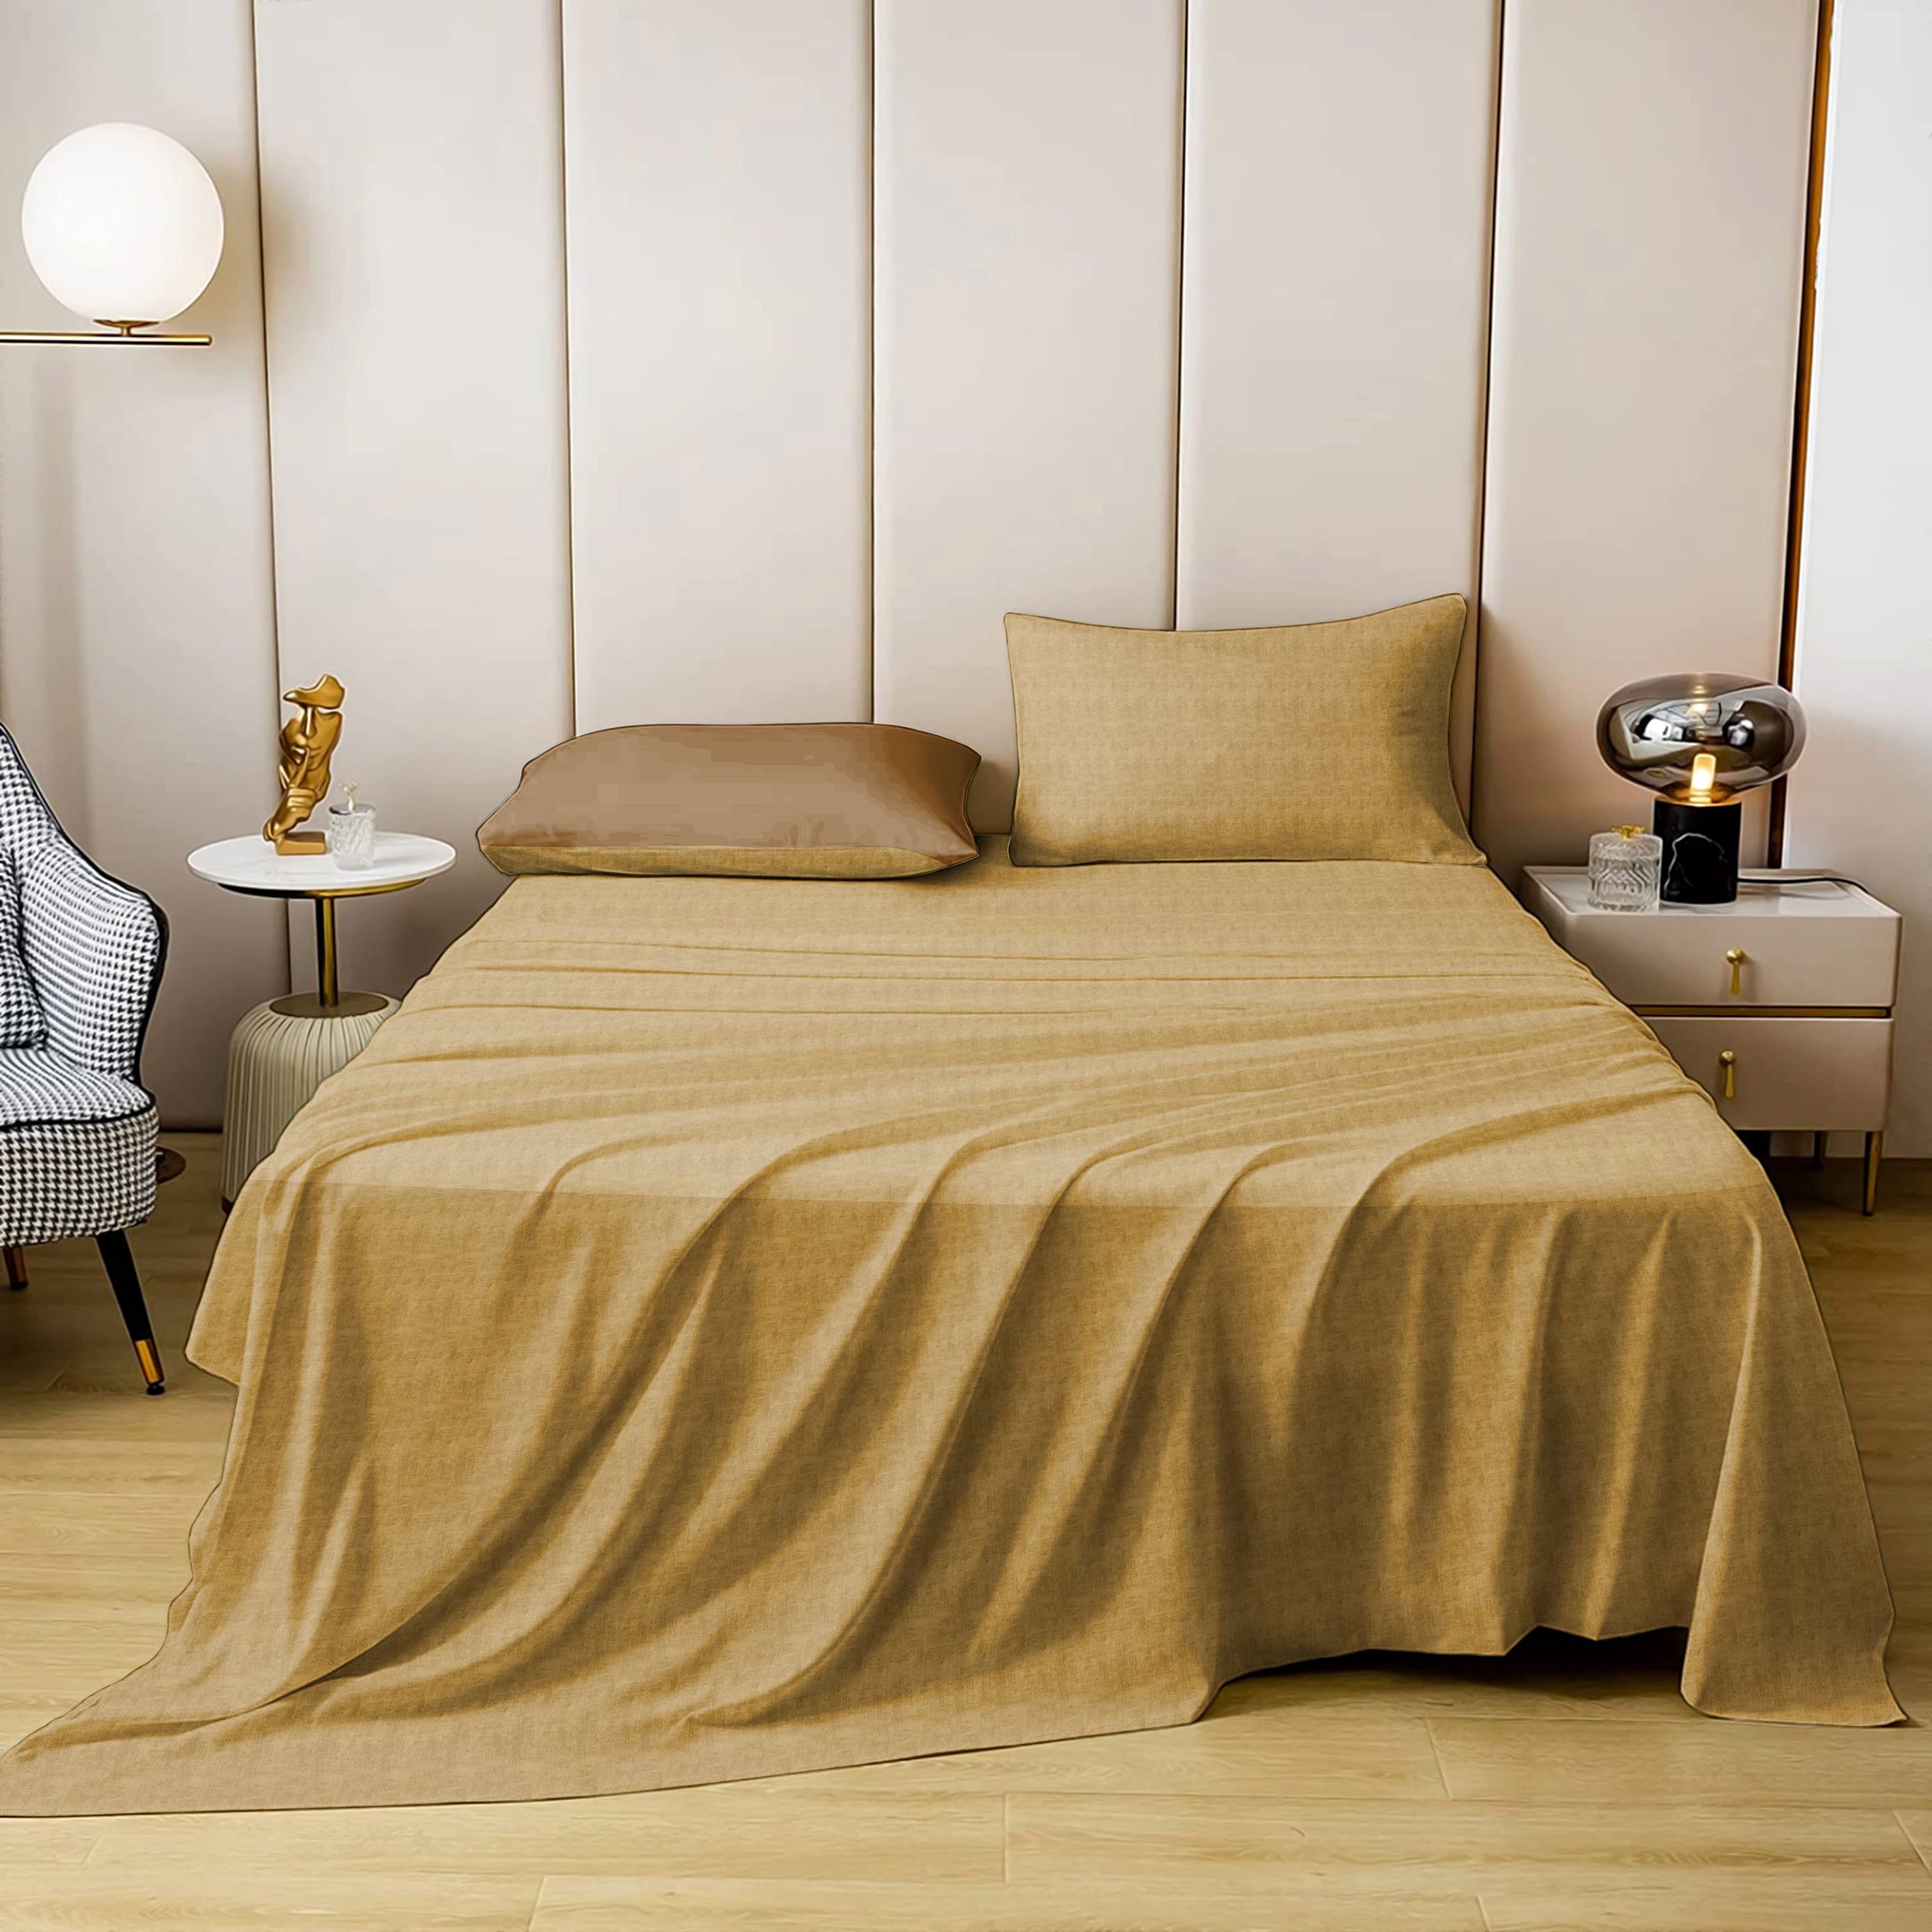 Jodhpur Texture Bedsheet for Double Bed with 2 PillowCovers King Size (104" X 90") Camel